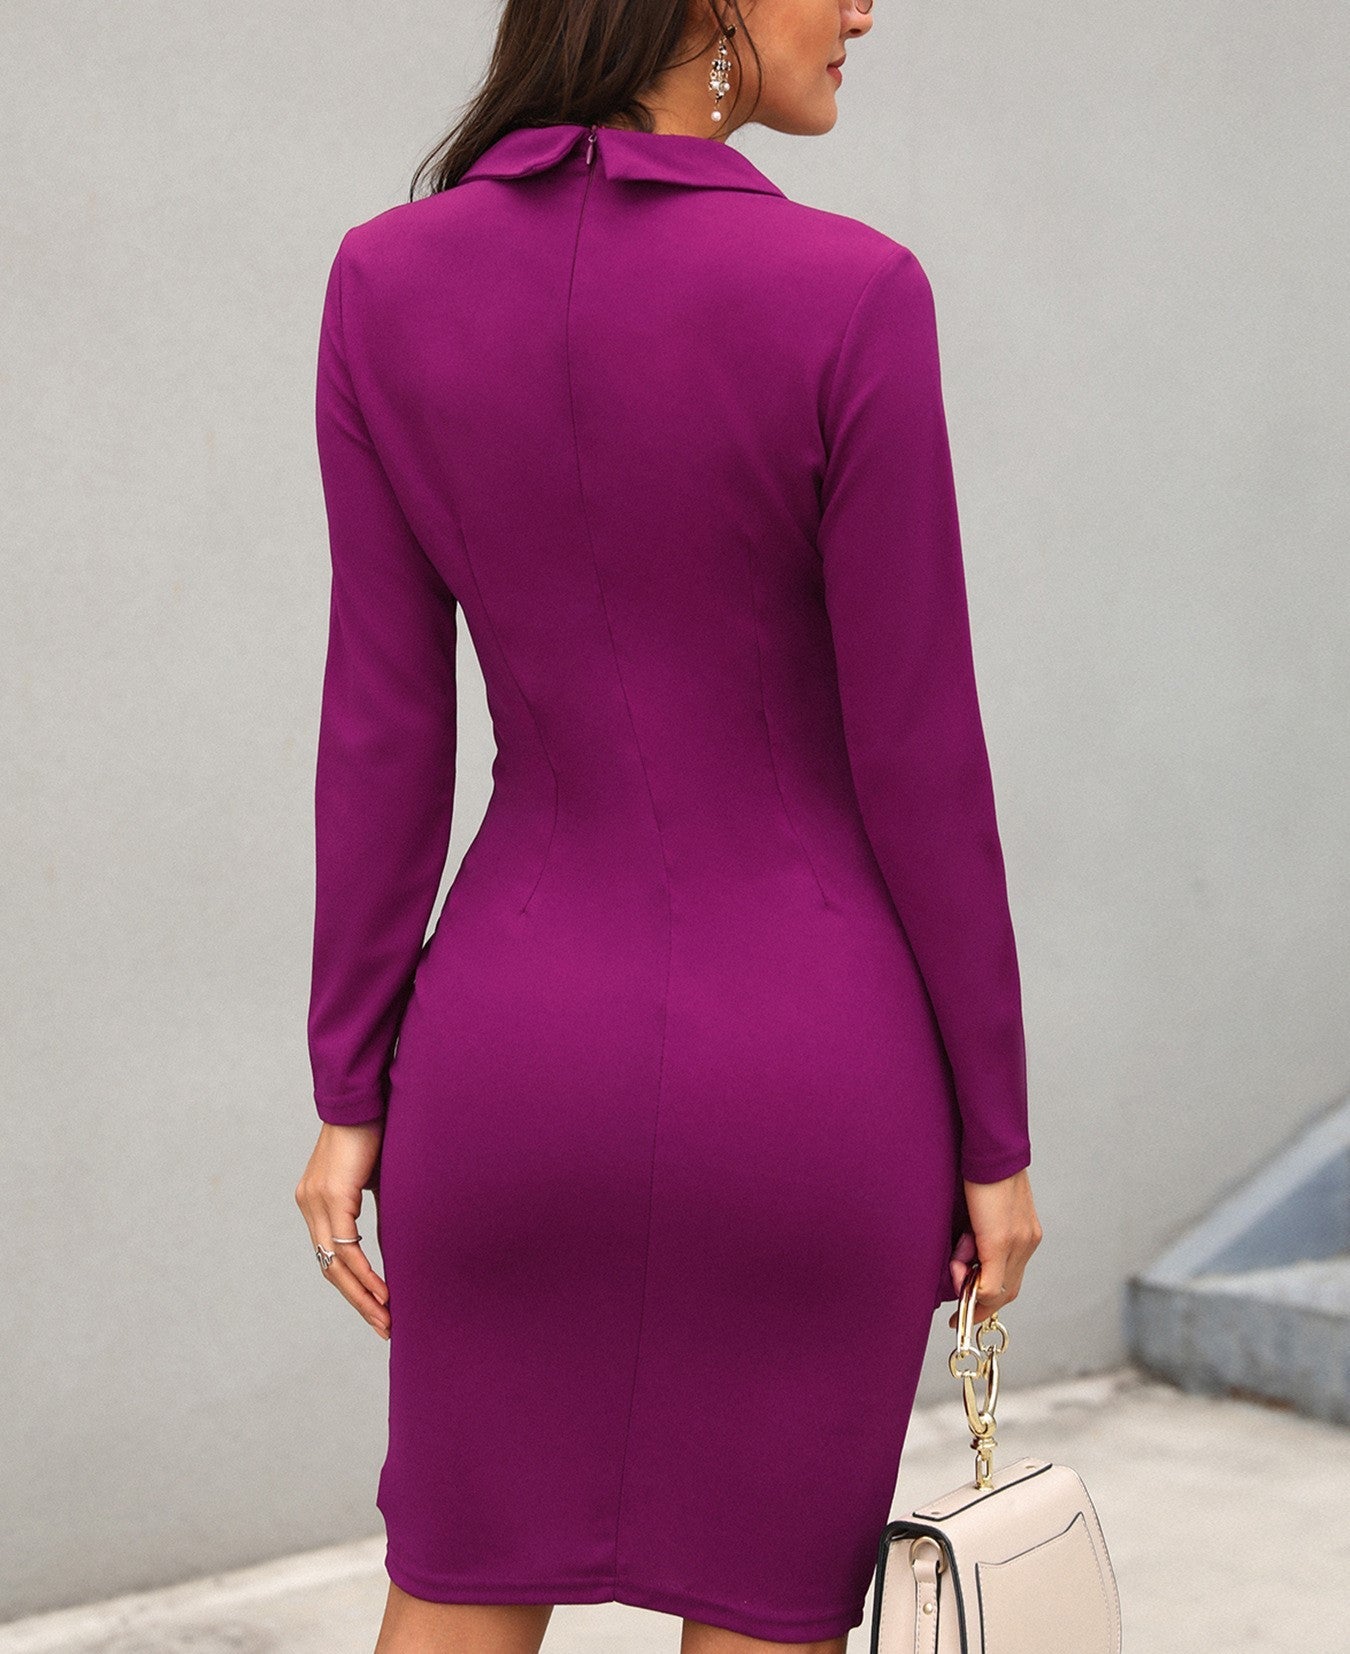 Formal OL Style Long Sleeves Dresses-Wine Red-S-Free Shipping Leatheretro